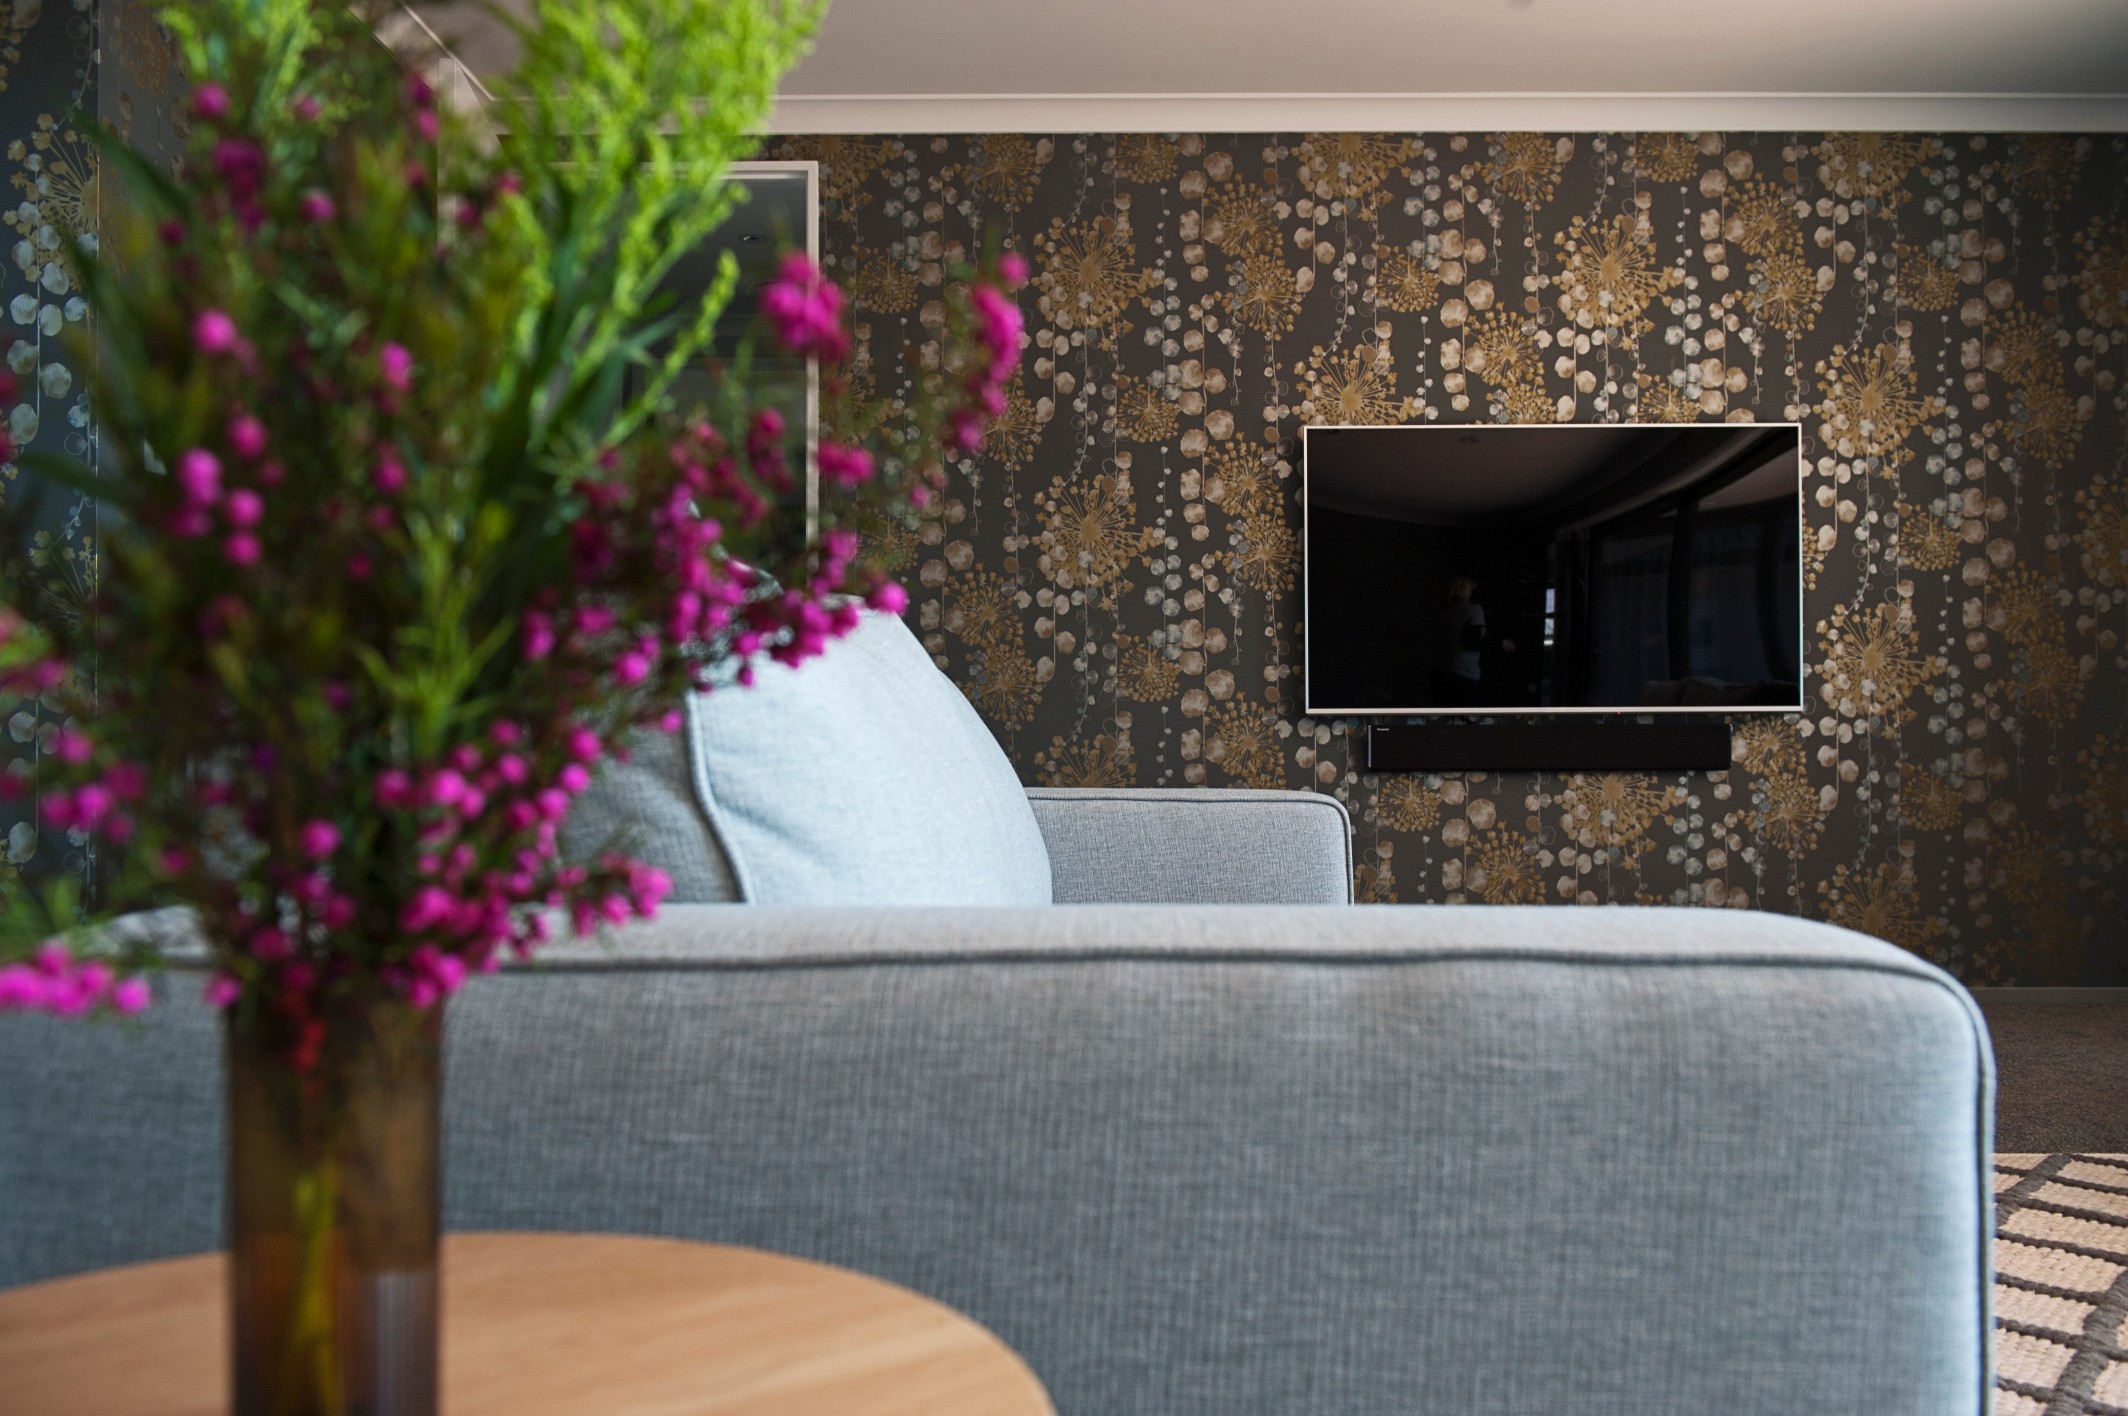  Feature Harlequin wallpaper add a splash of interest to this media room